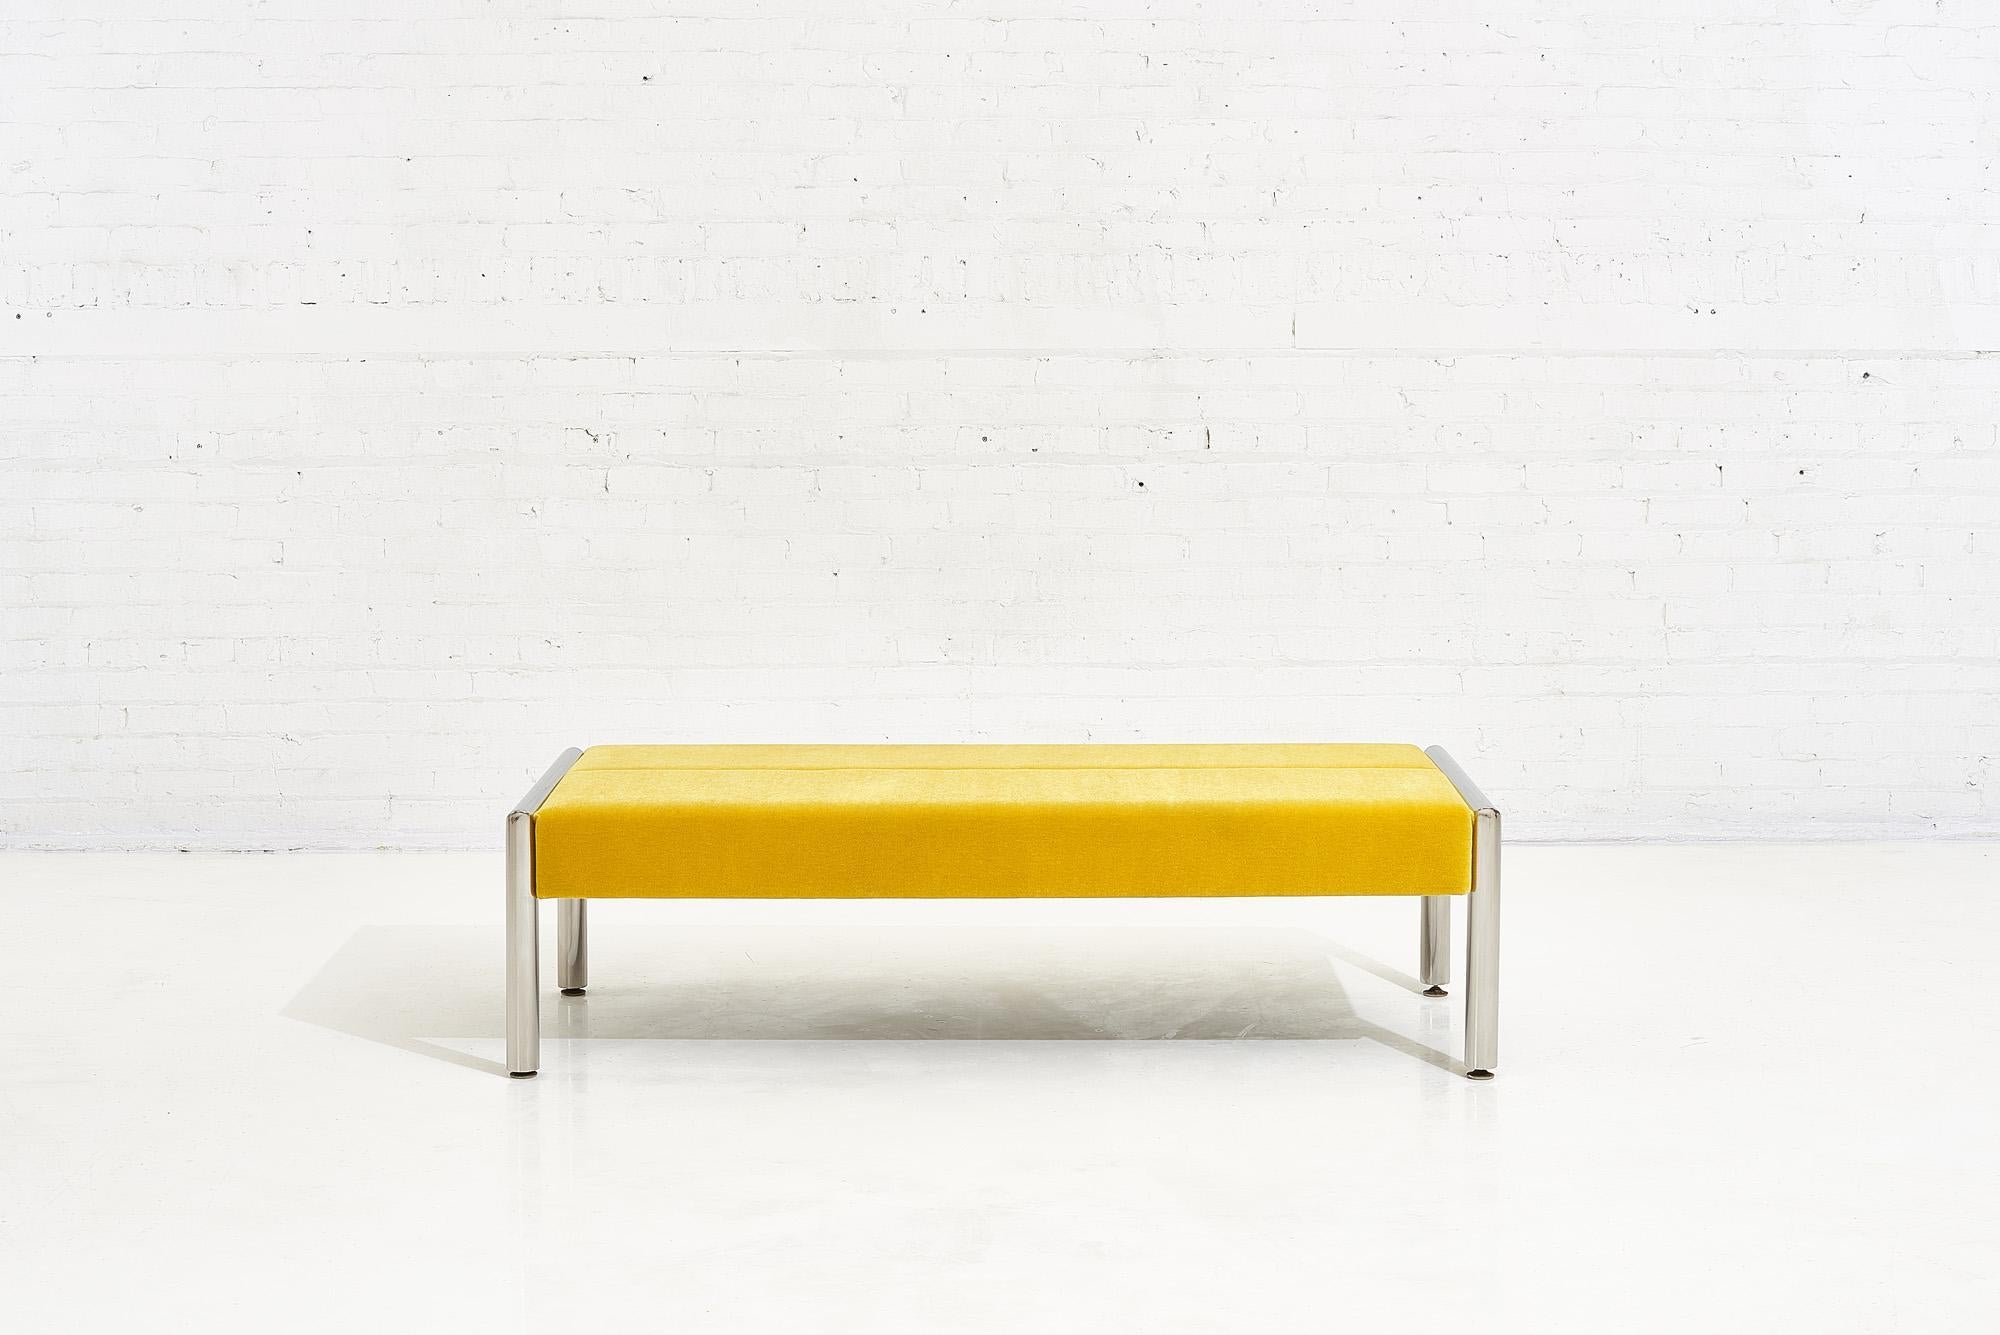 Stainless and mohair bench, 1970. Heavy tubular stainless steel, in the style of Karl Springer.